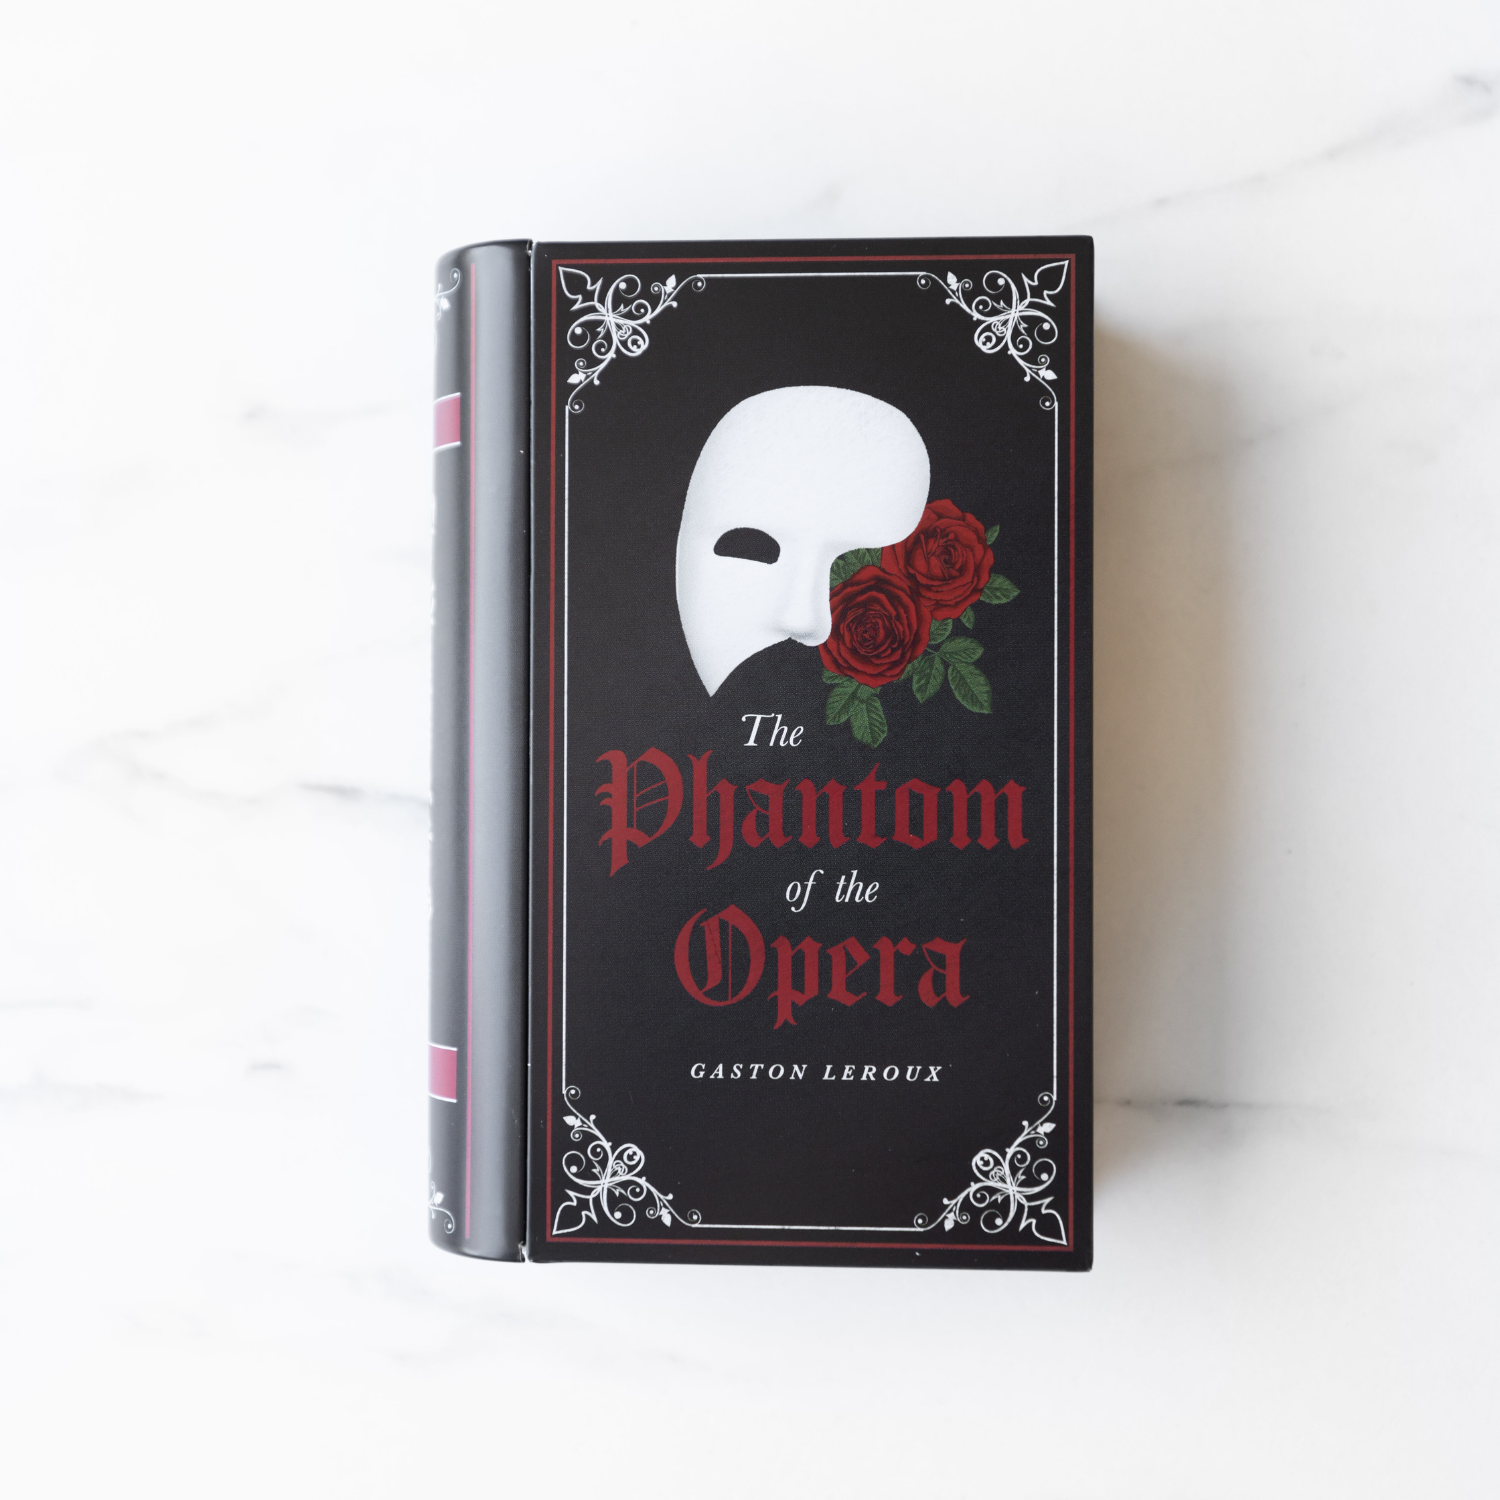 A black book tin that says The Phantom of the Opera on the front with a white mask and roses.